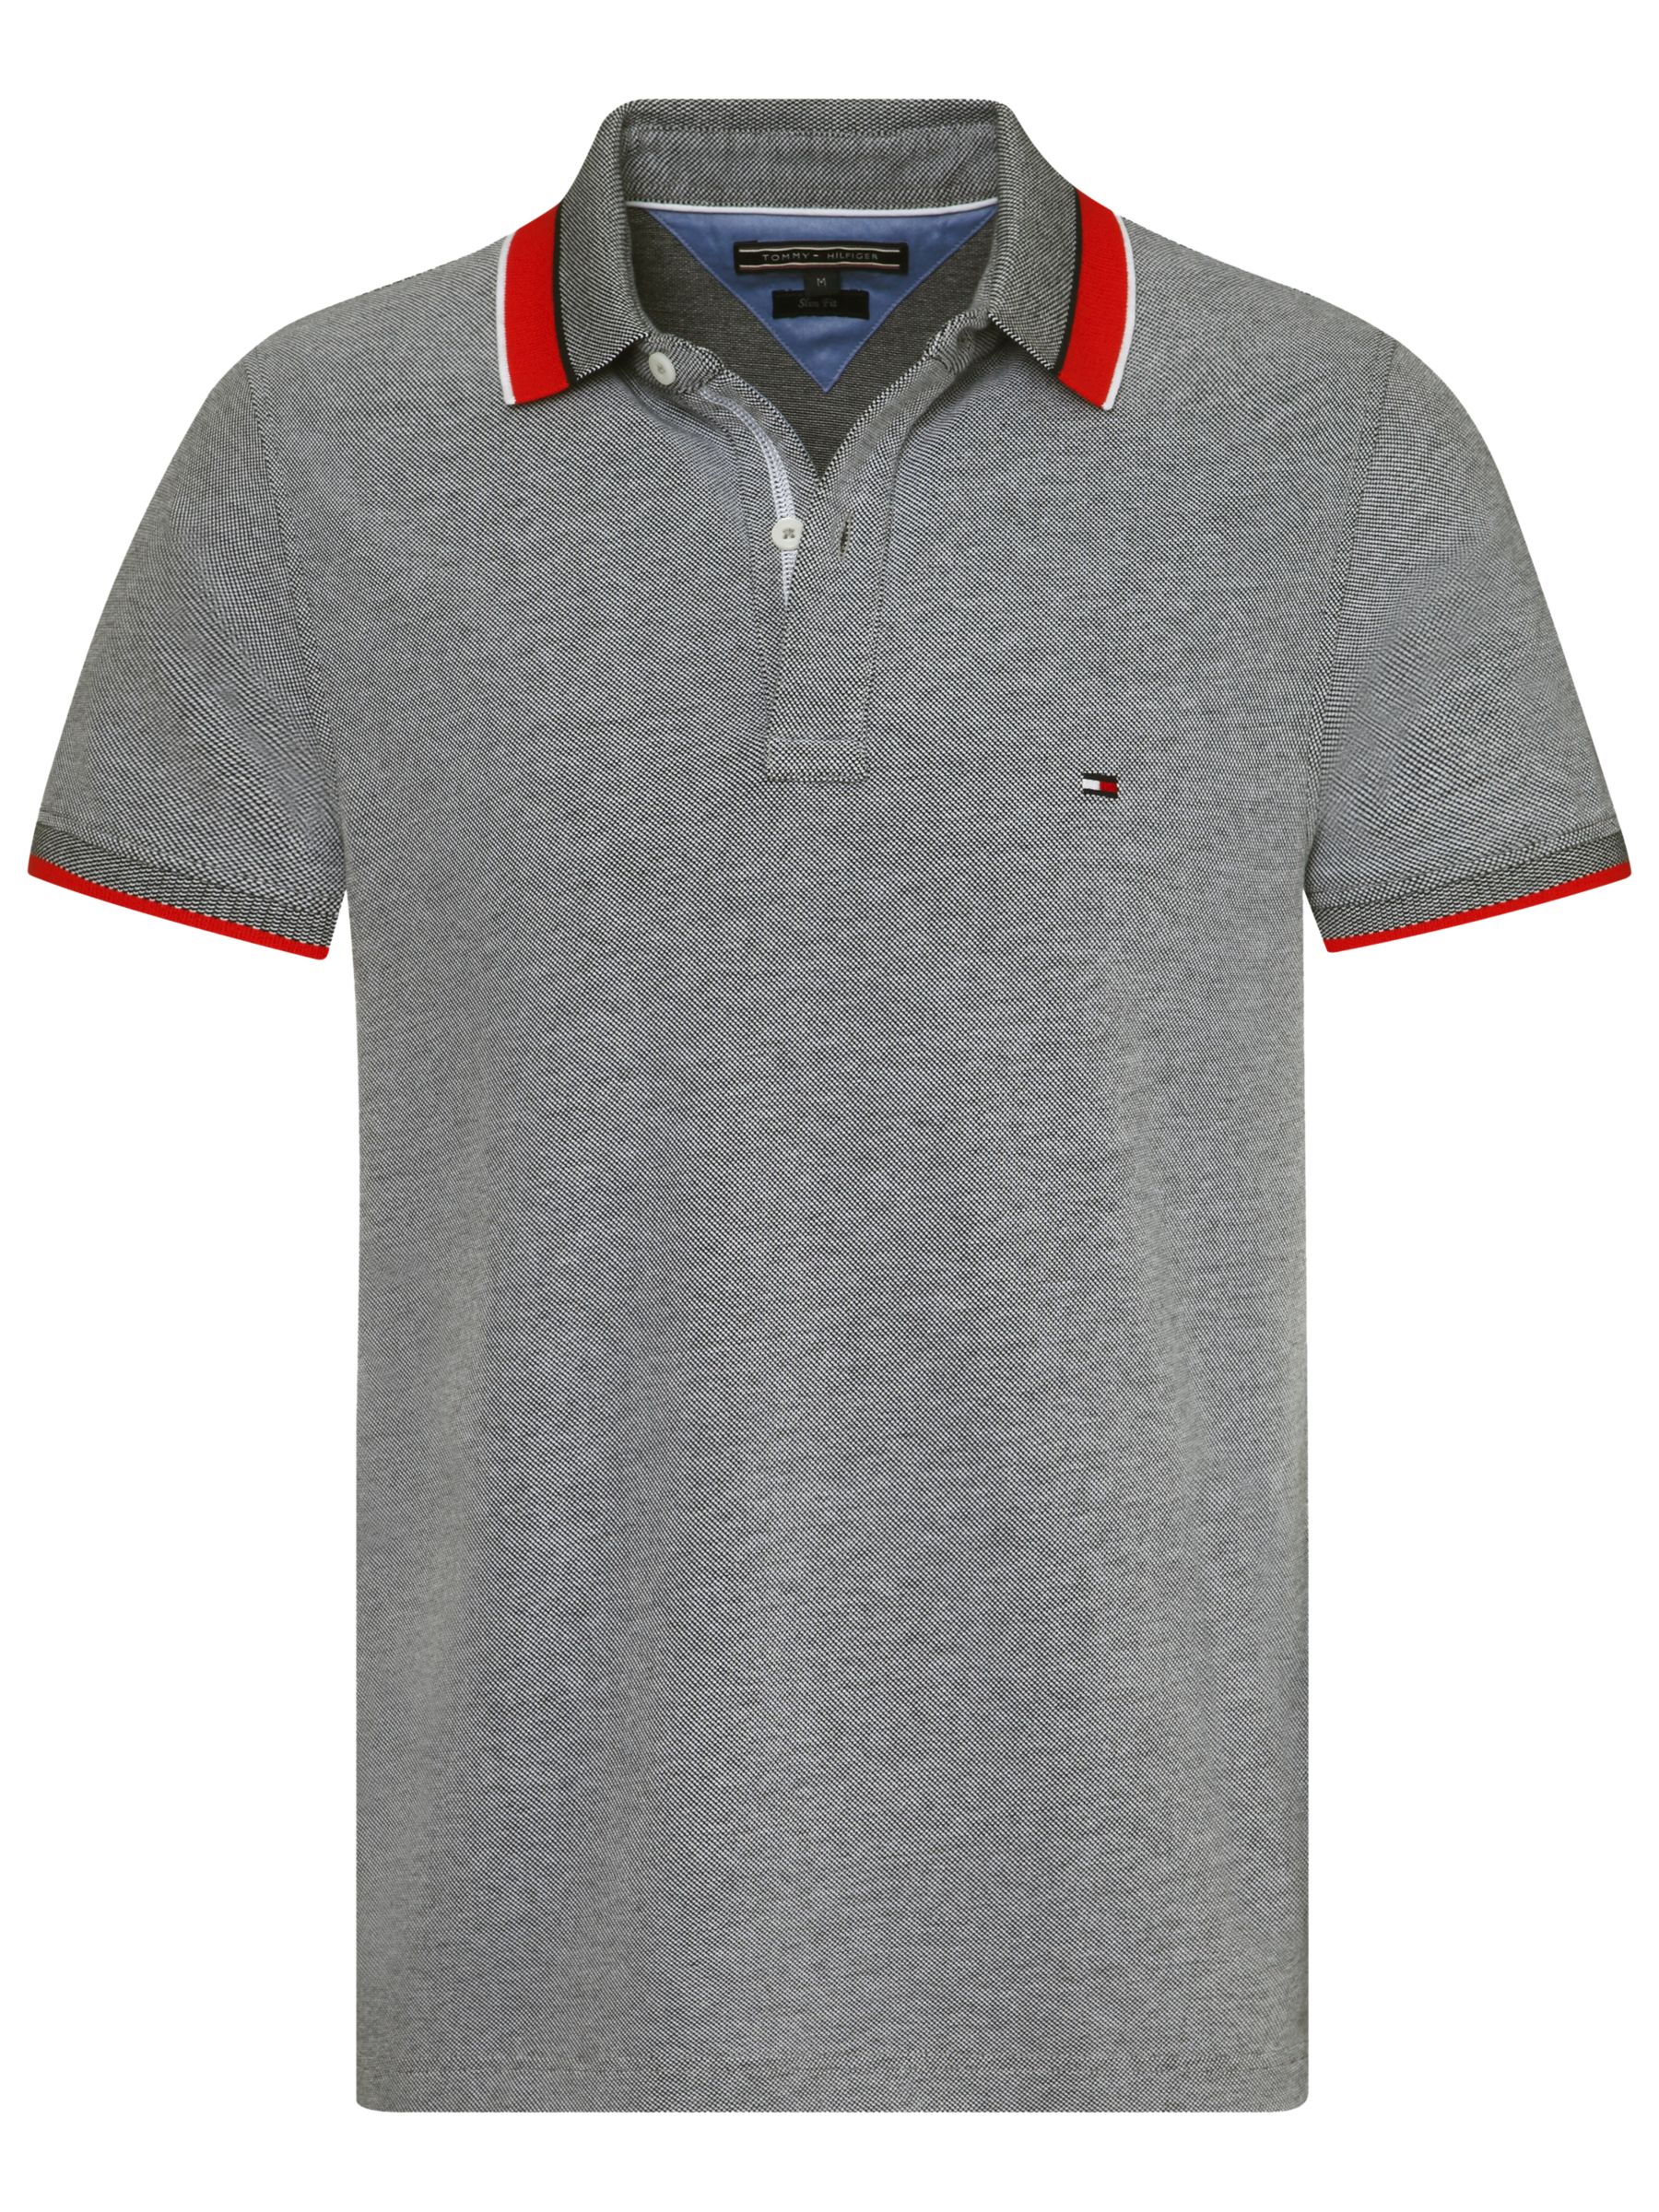 Tommy Hilfiger Oxford Tipped Slim Polo Shirt, Sky Captain